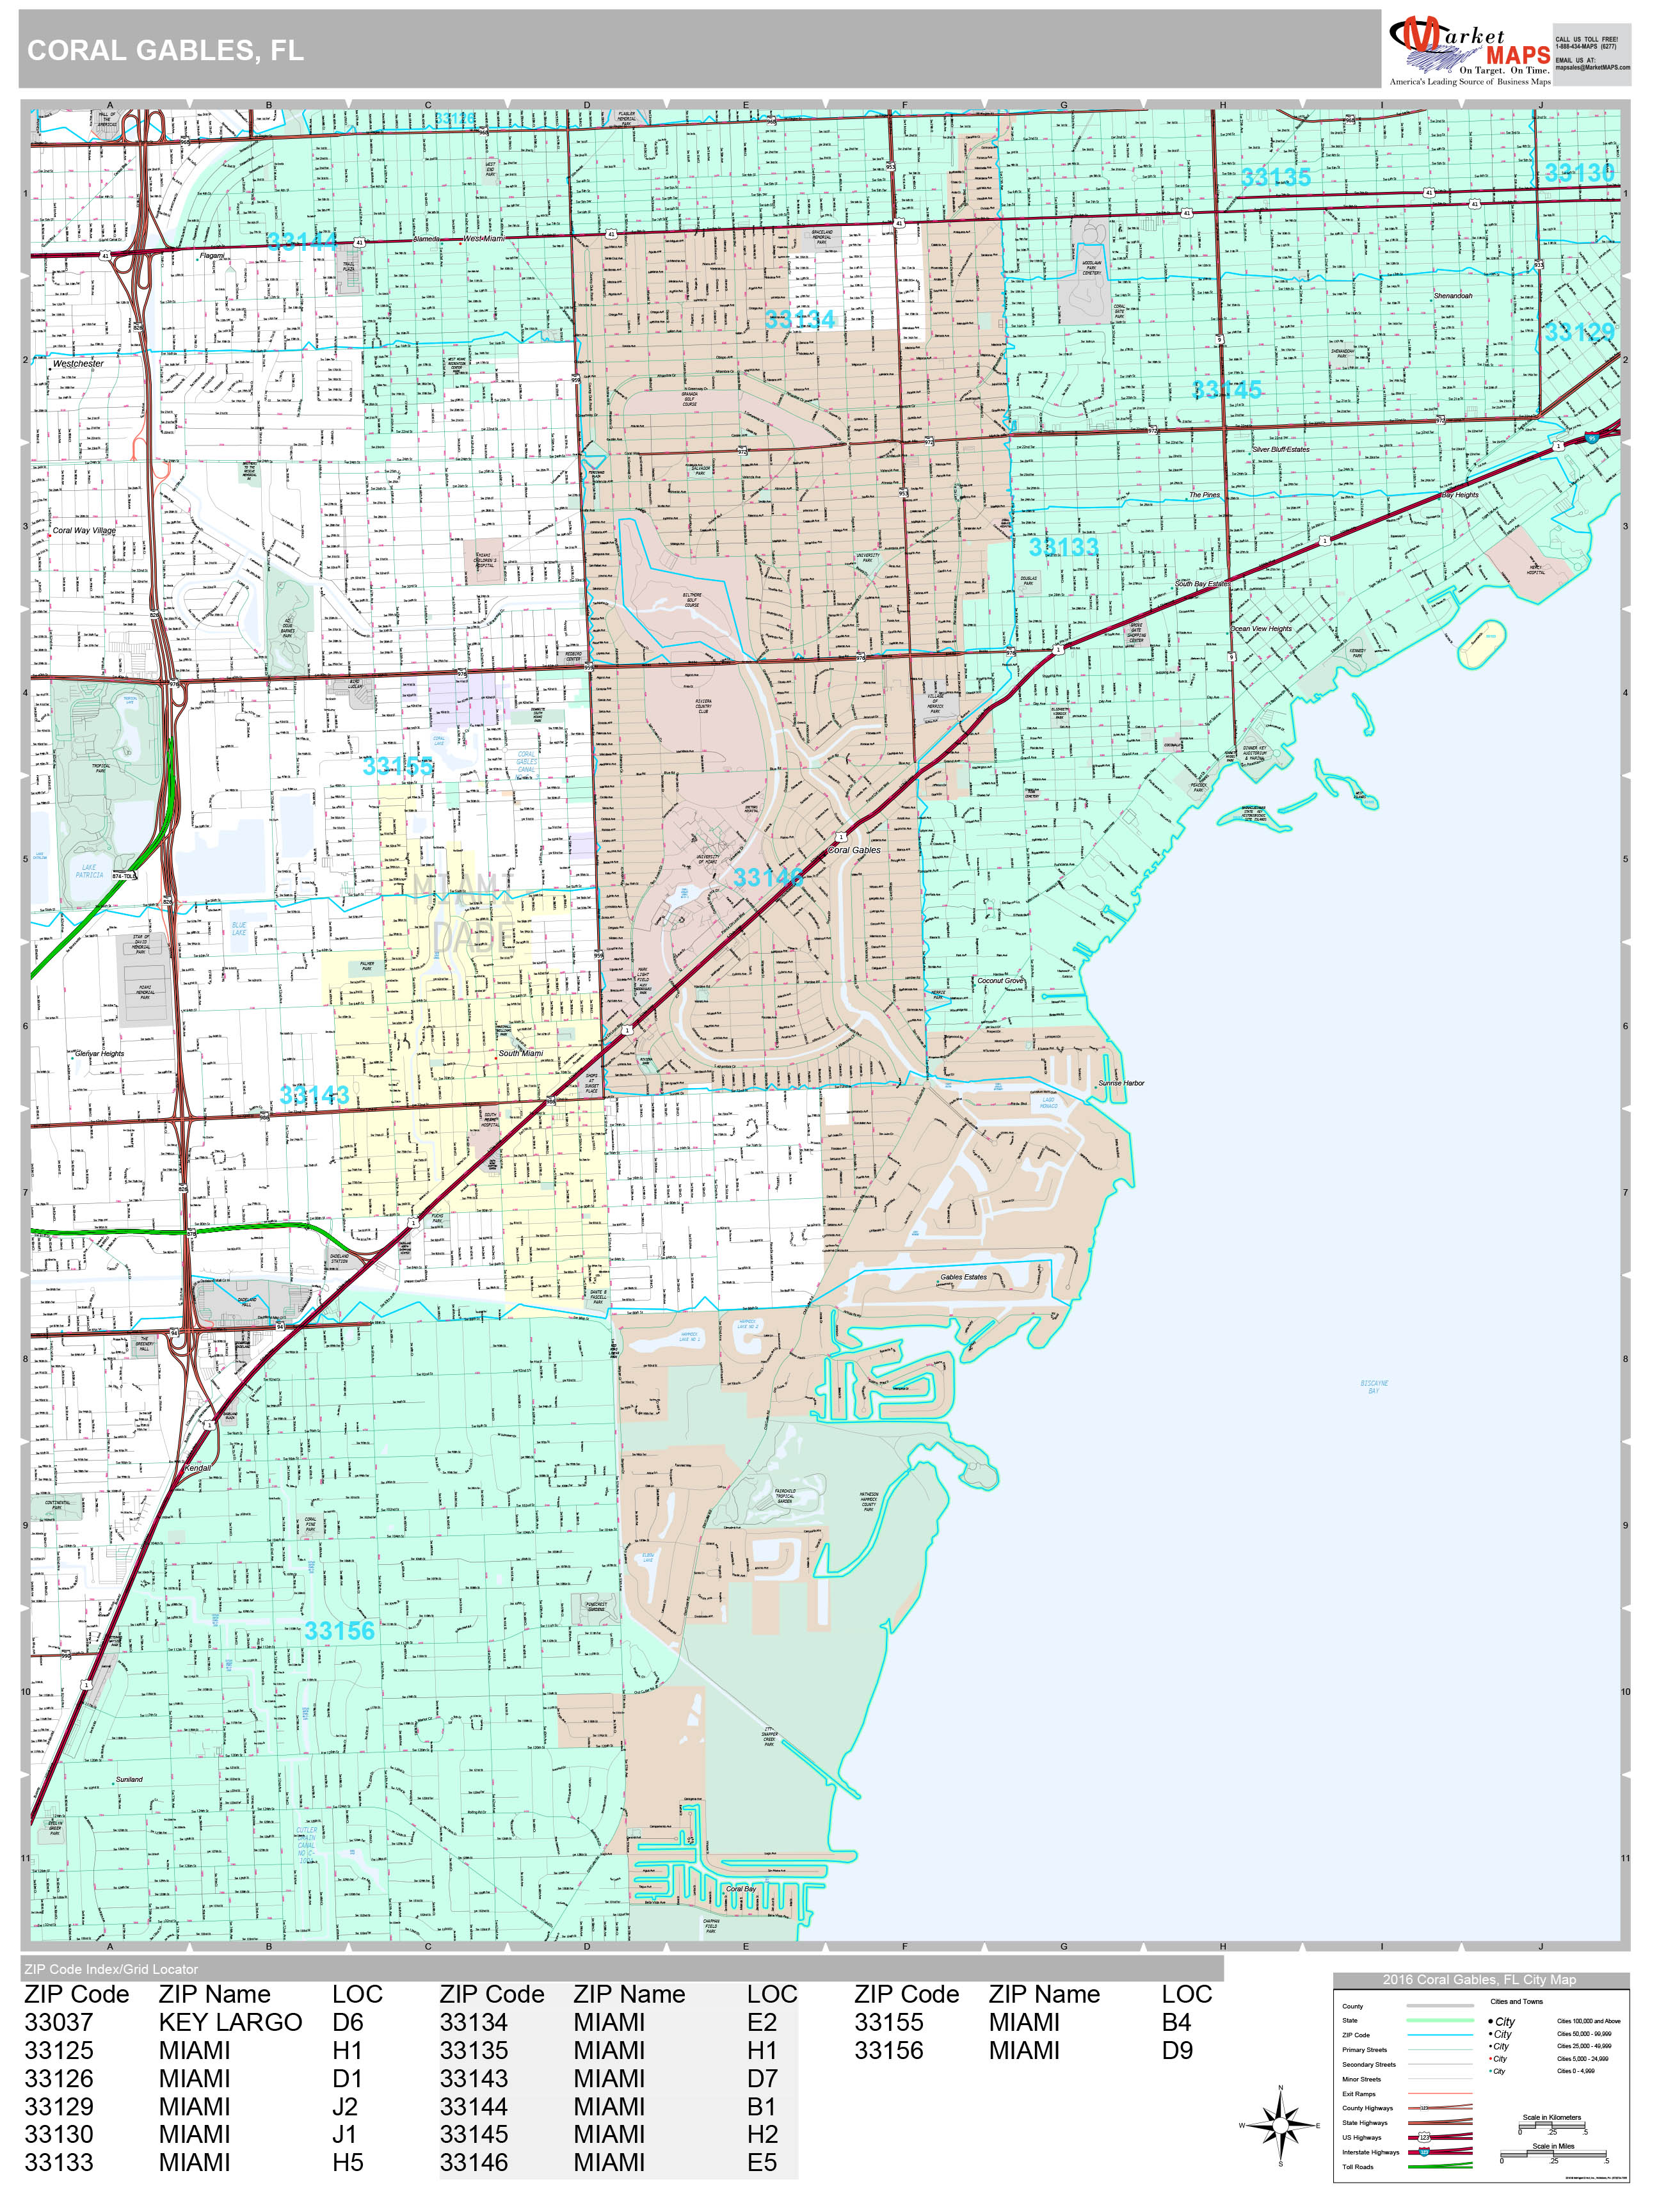 Coral Gables Florida Wall Map (Premium Style) by MarketMAPS - MapSales.com